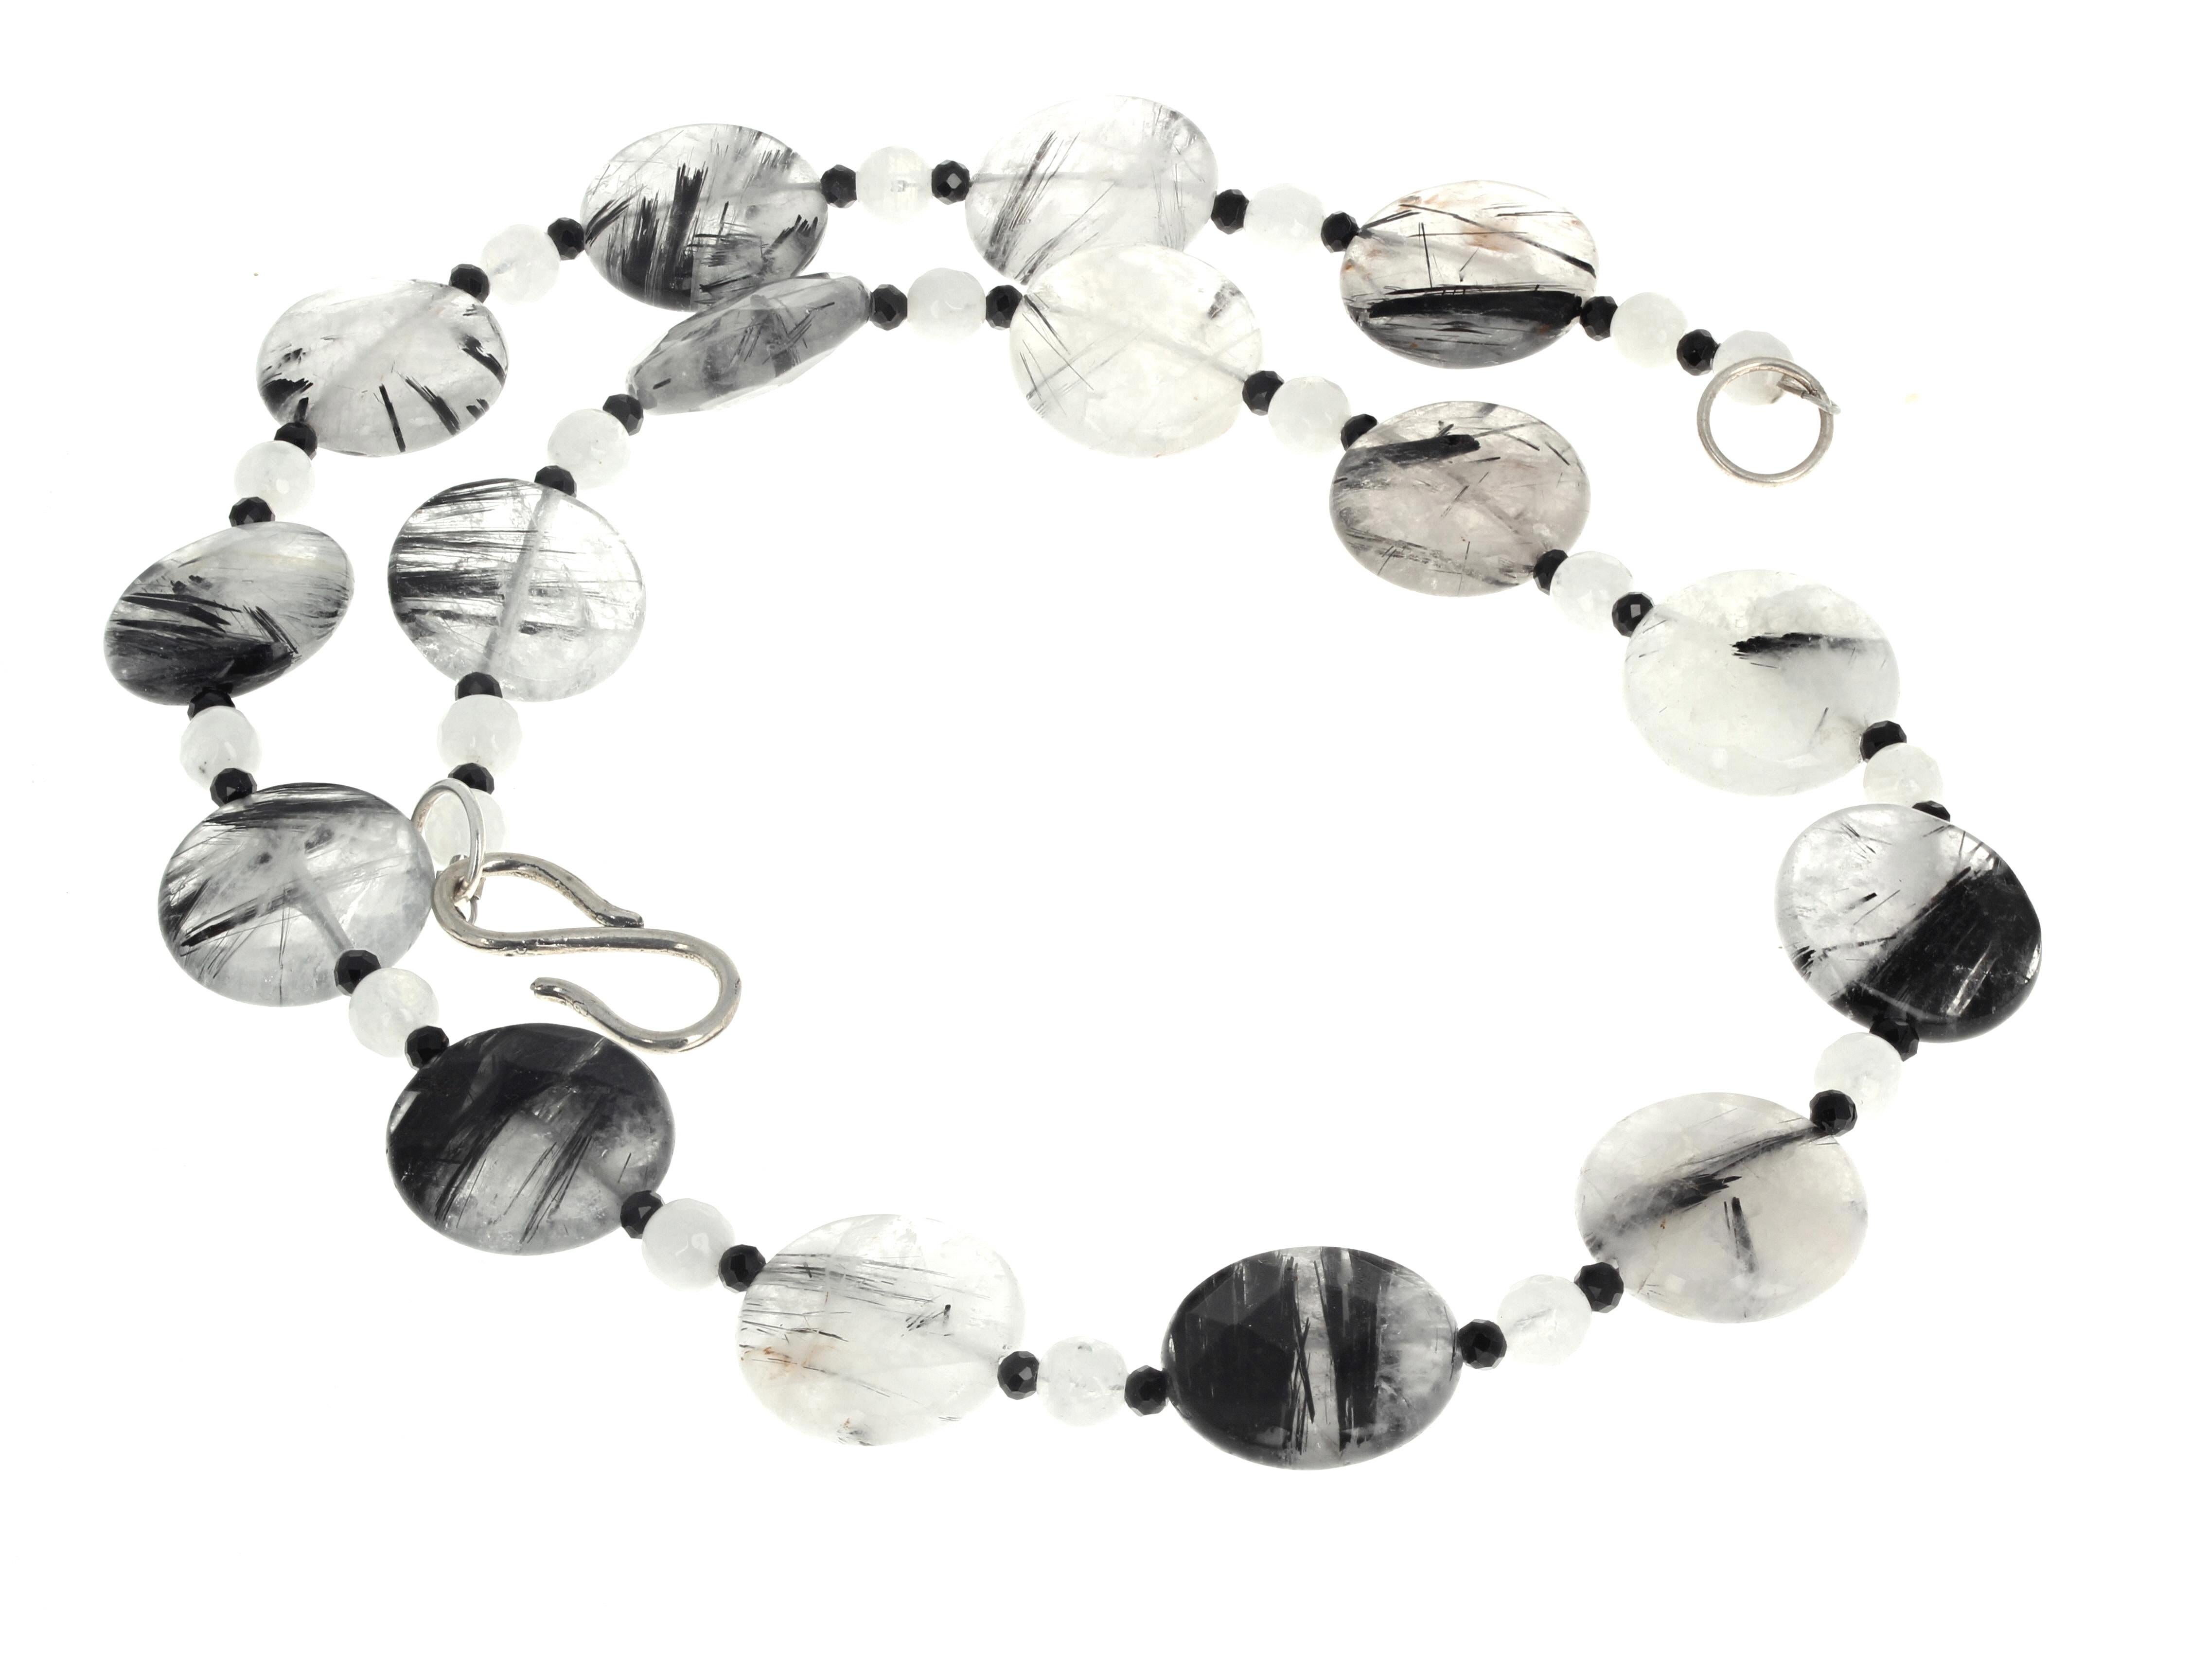 This interesting black and white 18 inch long dramatic necklace is enhanced with round white Quartz gem cut rondels and little black Onyx spacers.  The big round rutilated Quartz are approximately 17mm.  The clasp is a silver easy to use hook clasp.